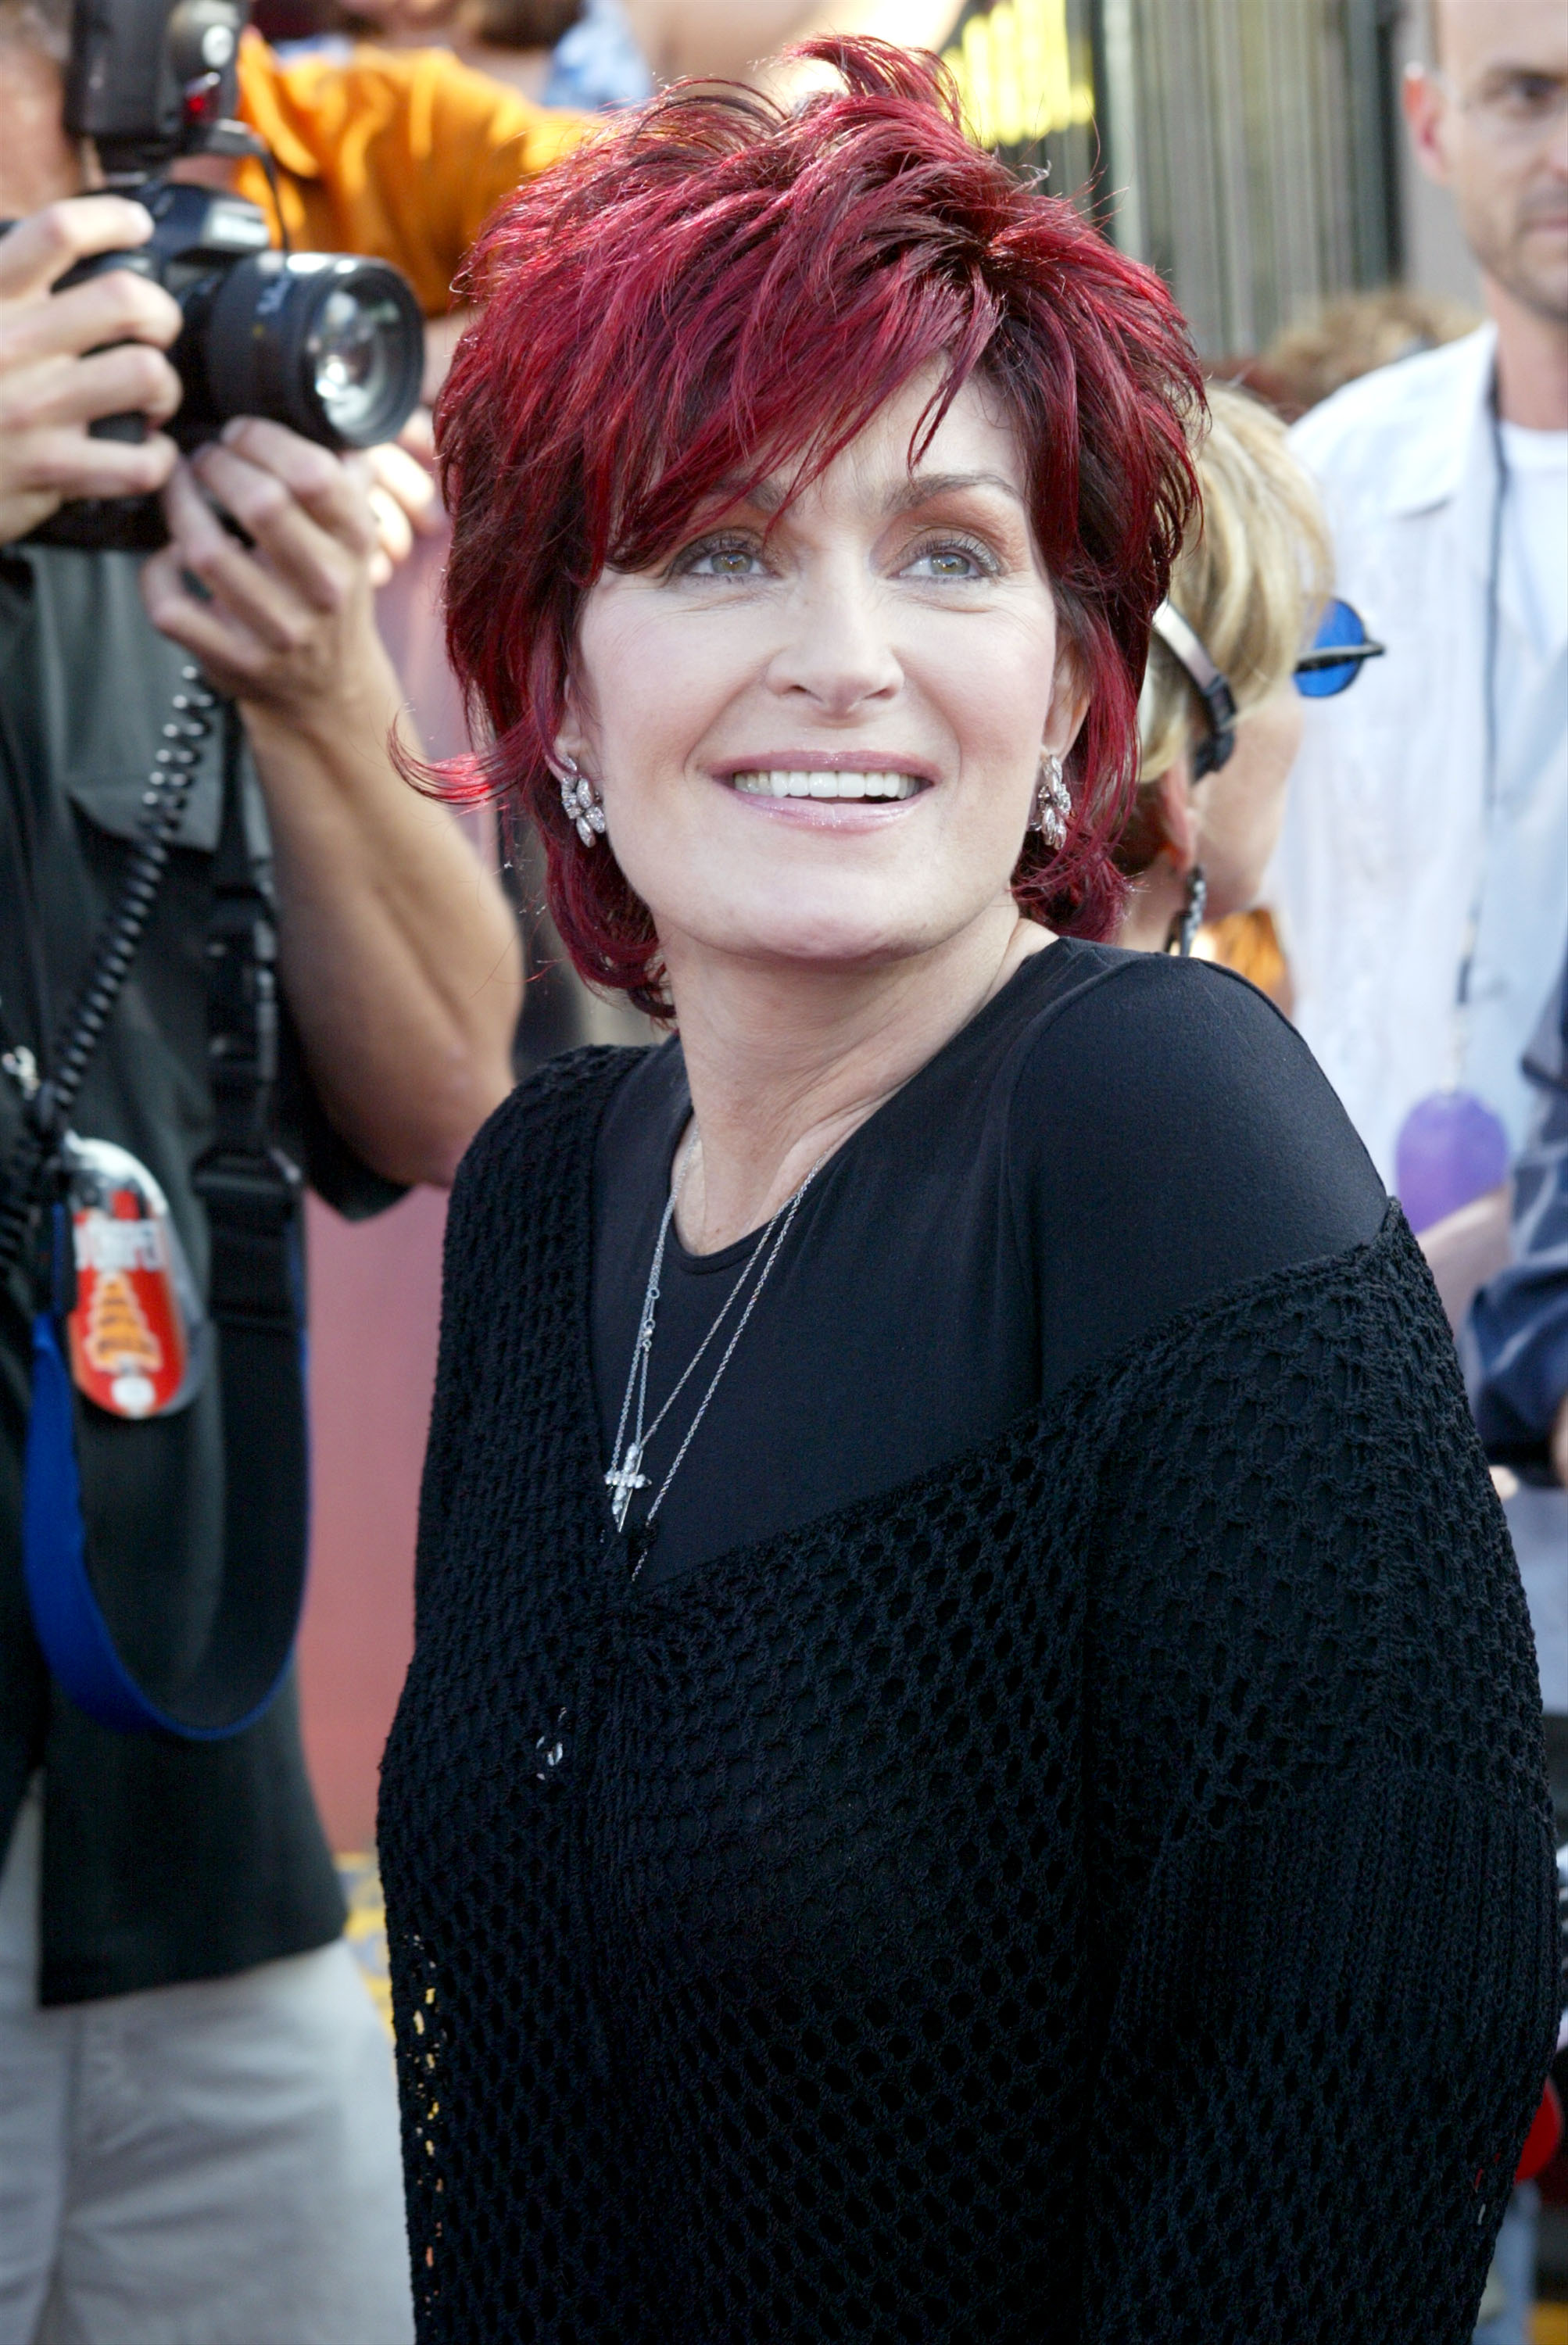 Sharon Osbourne attending the  MTV Movie Awards at The Shrine Auditorium in Los Angeles, California, on June 1, 2002 | Source: Getty Images